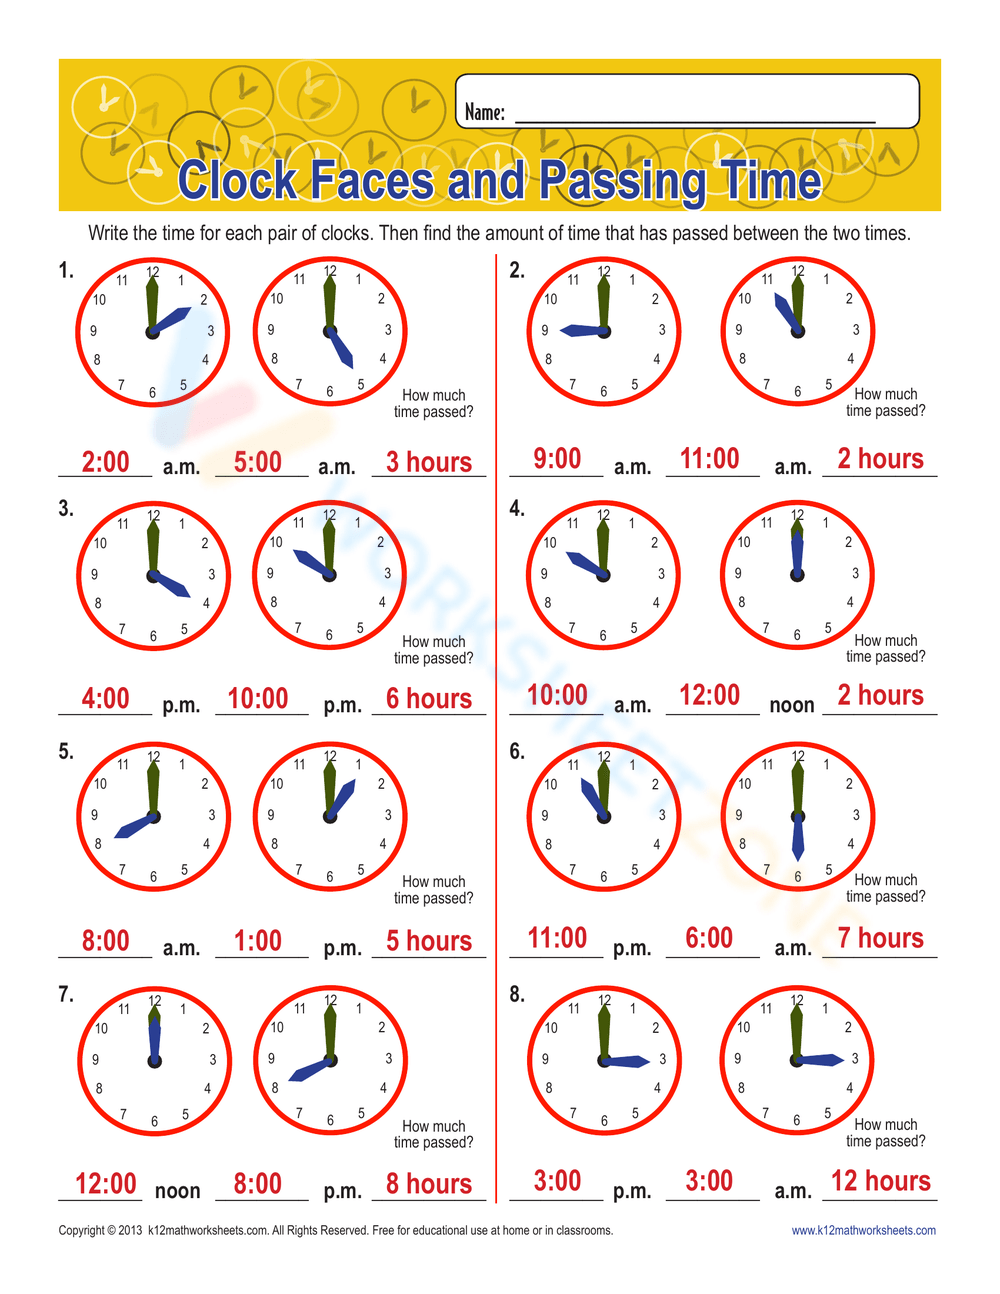 Clock Faces and Passing Time